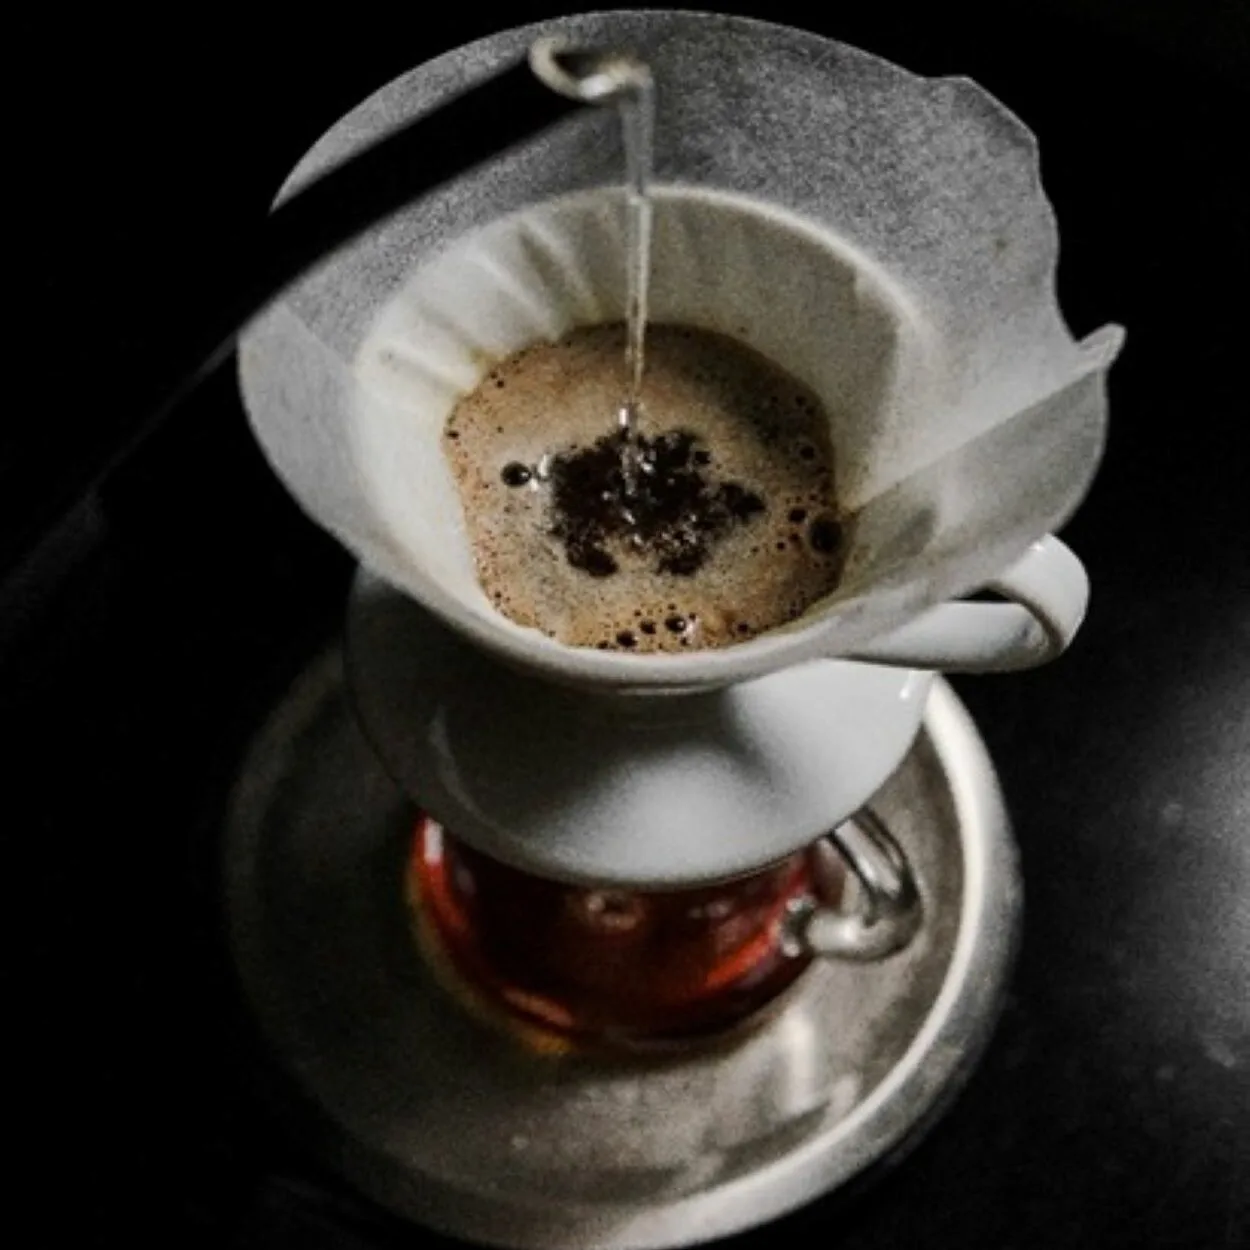 A coffee Filter is used to filter coffee